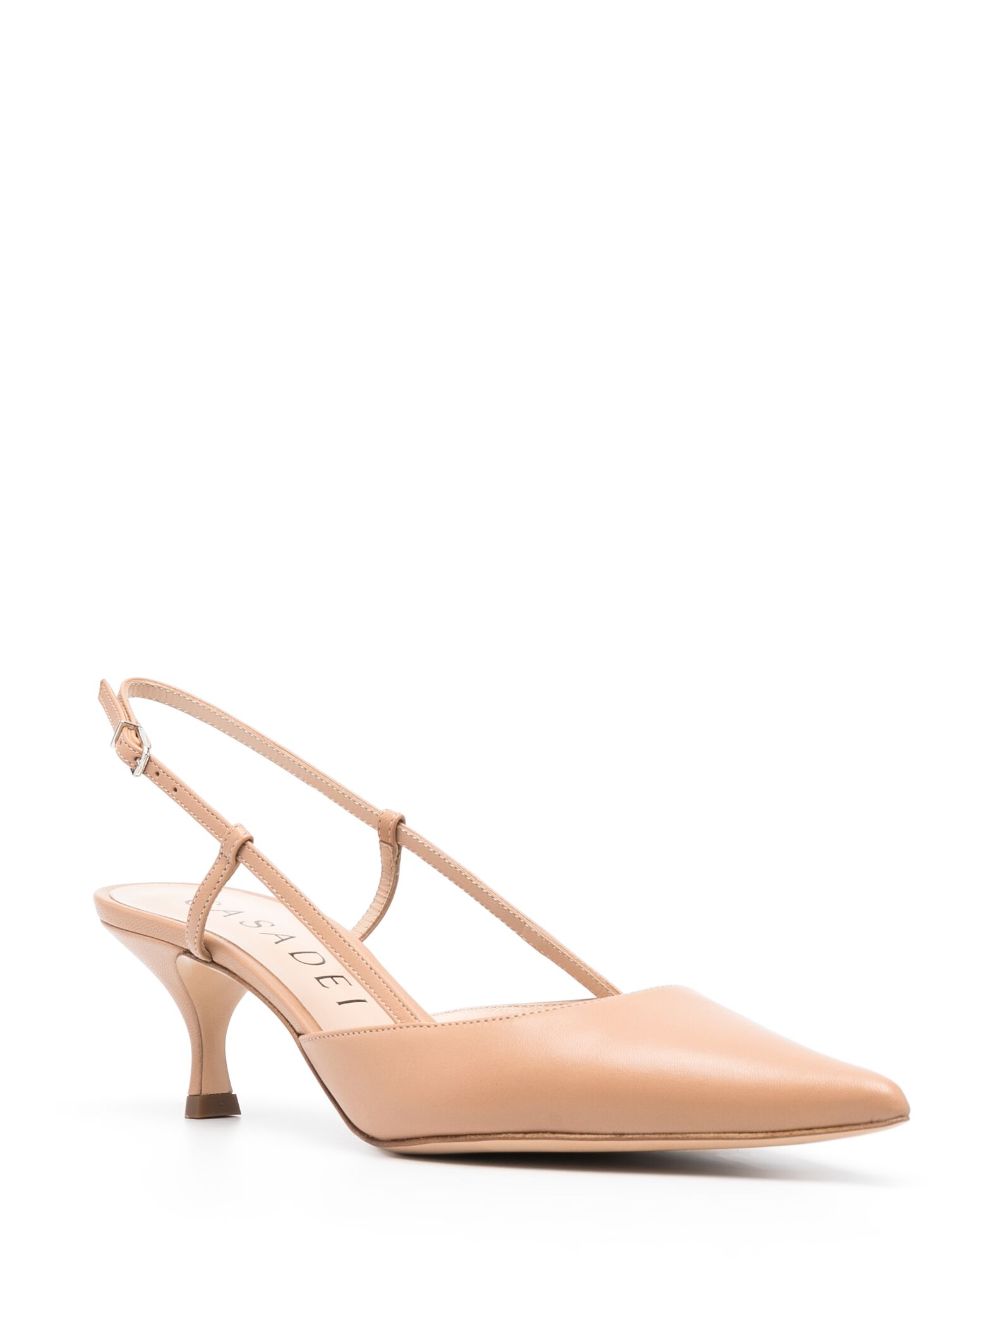 Casadei 55mm slingback pointed leather pumps - Beige